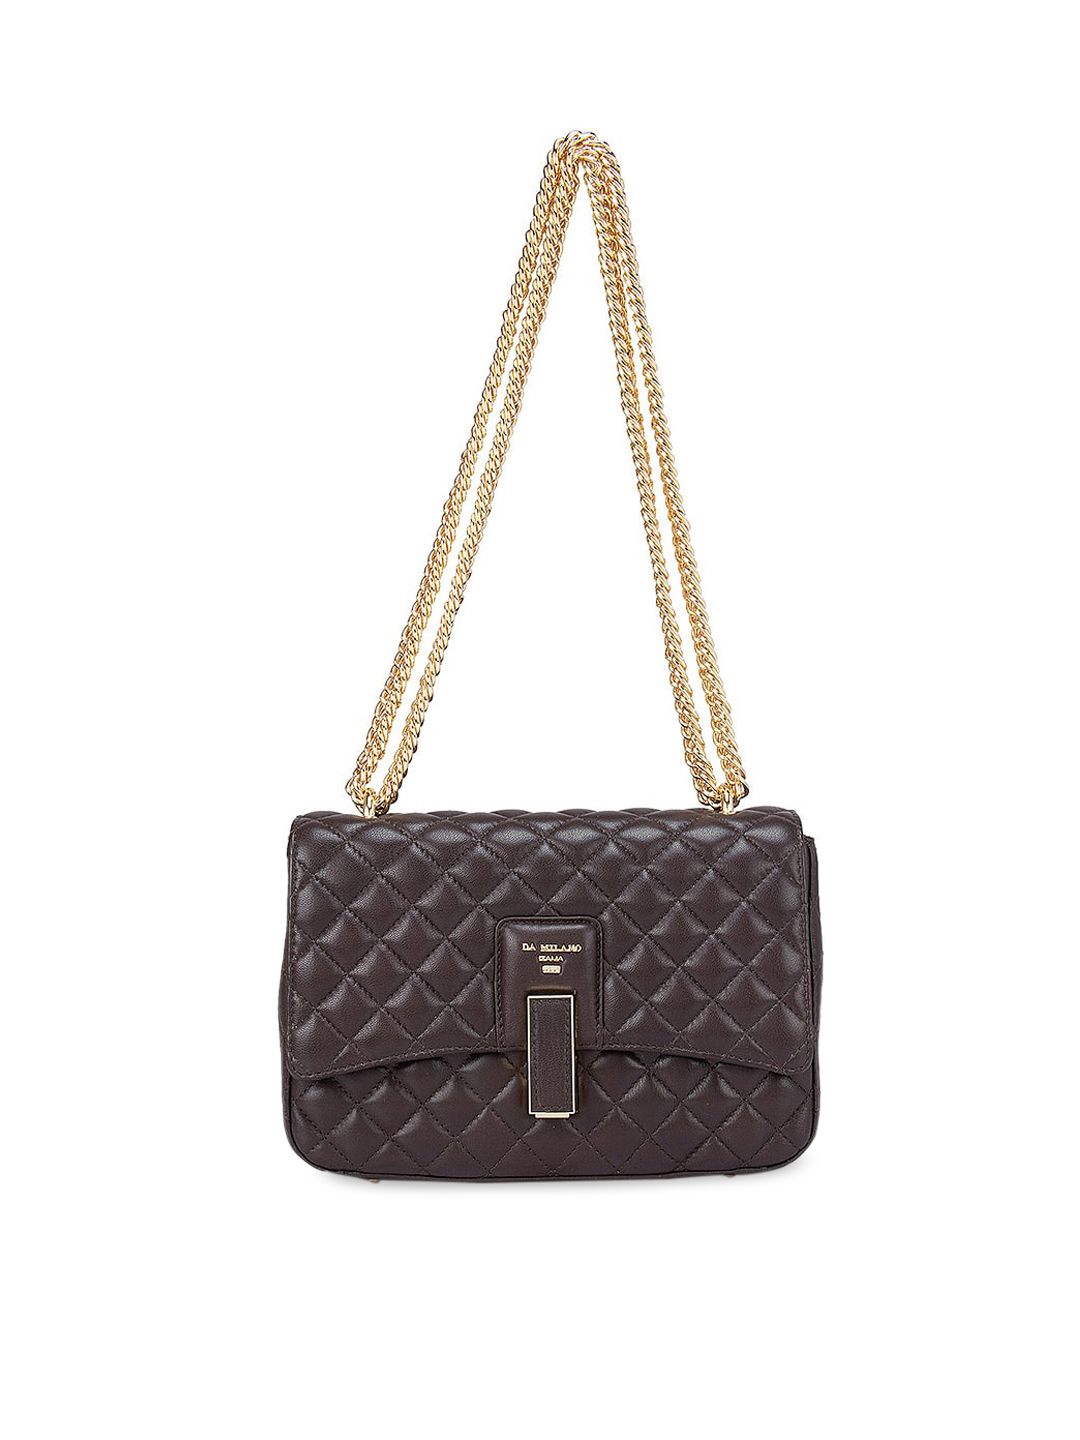 Da Milano Brown Geometric Textured Leather Structured Sling Bag Price in India